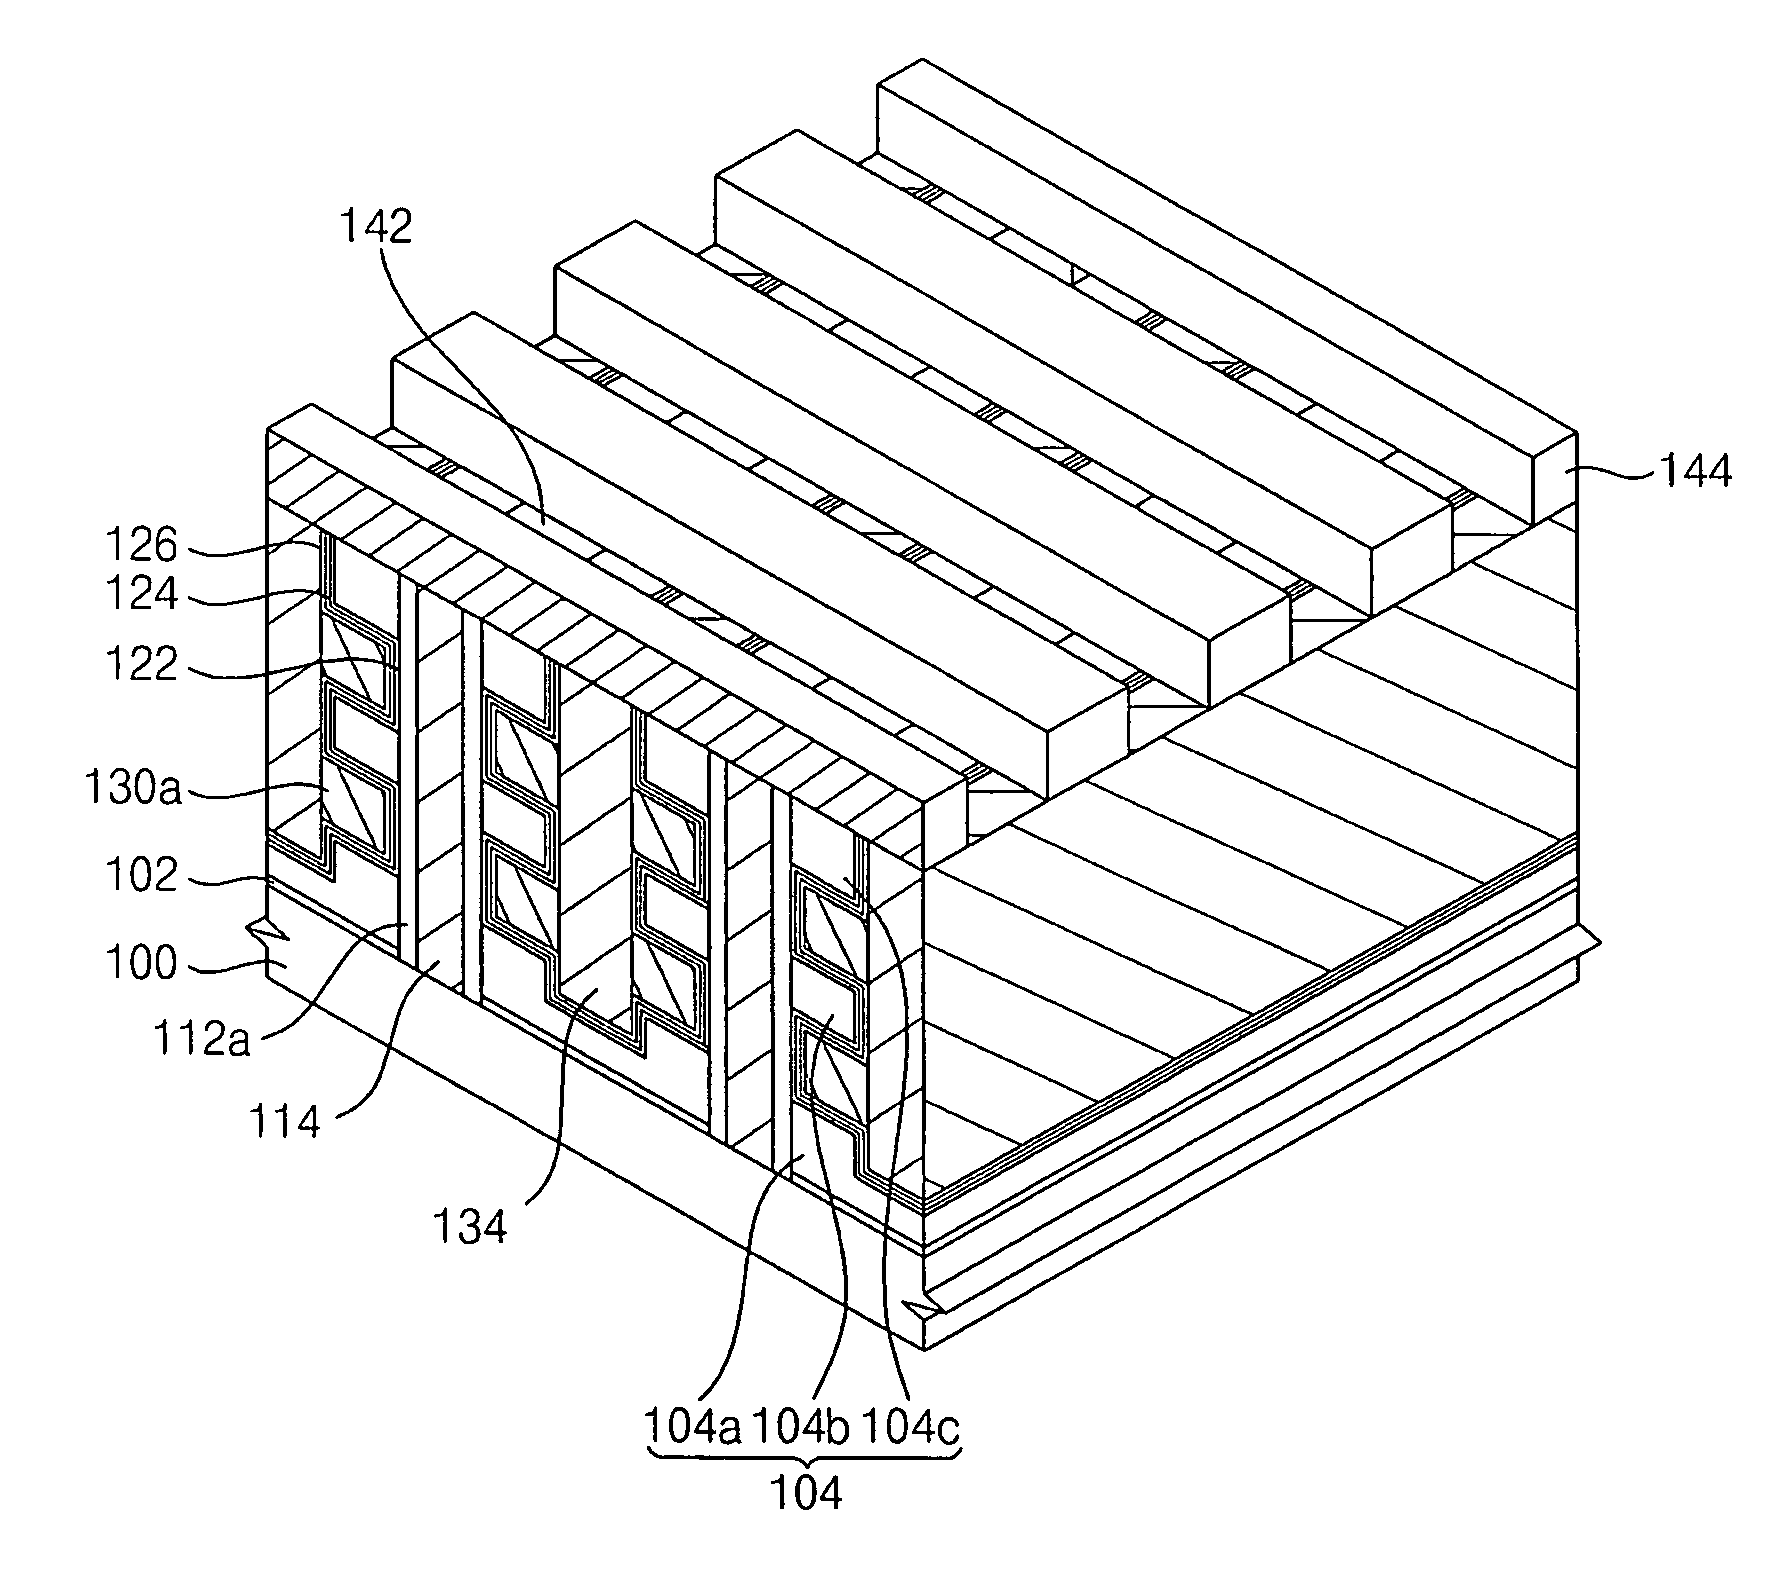 Vertical-type semiconductor devices